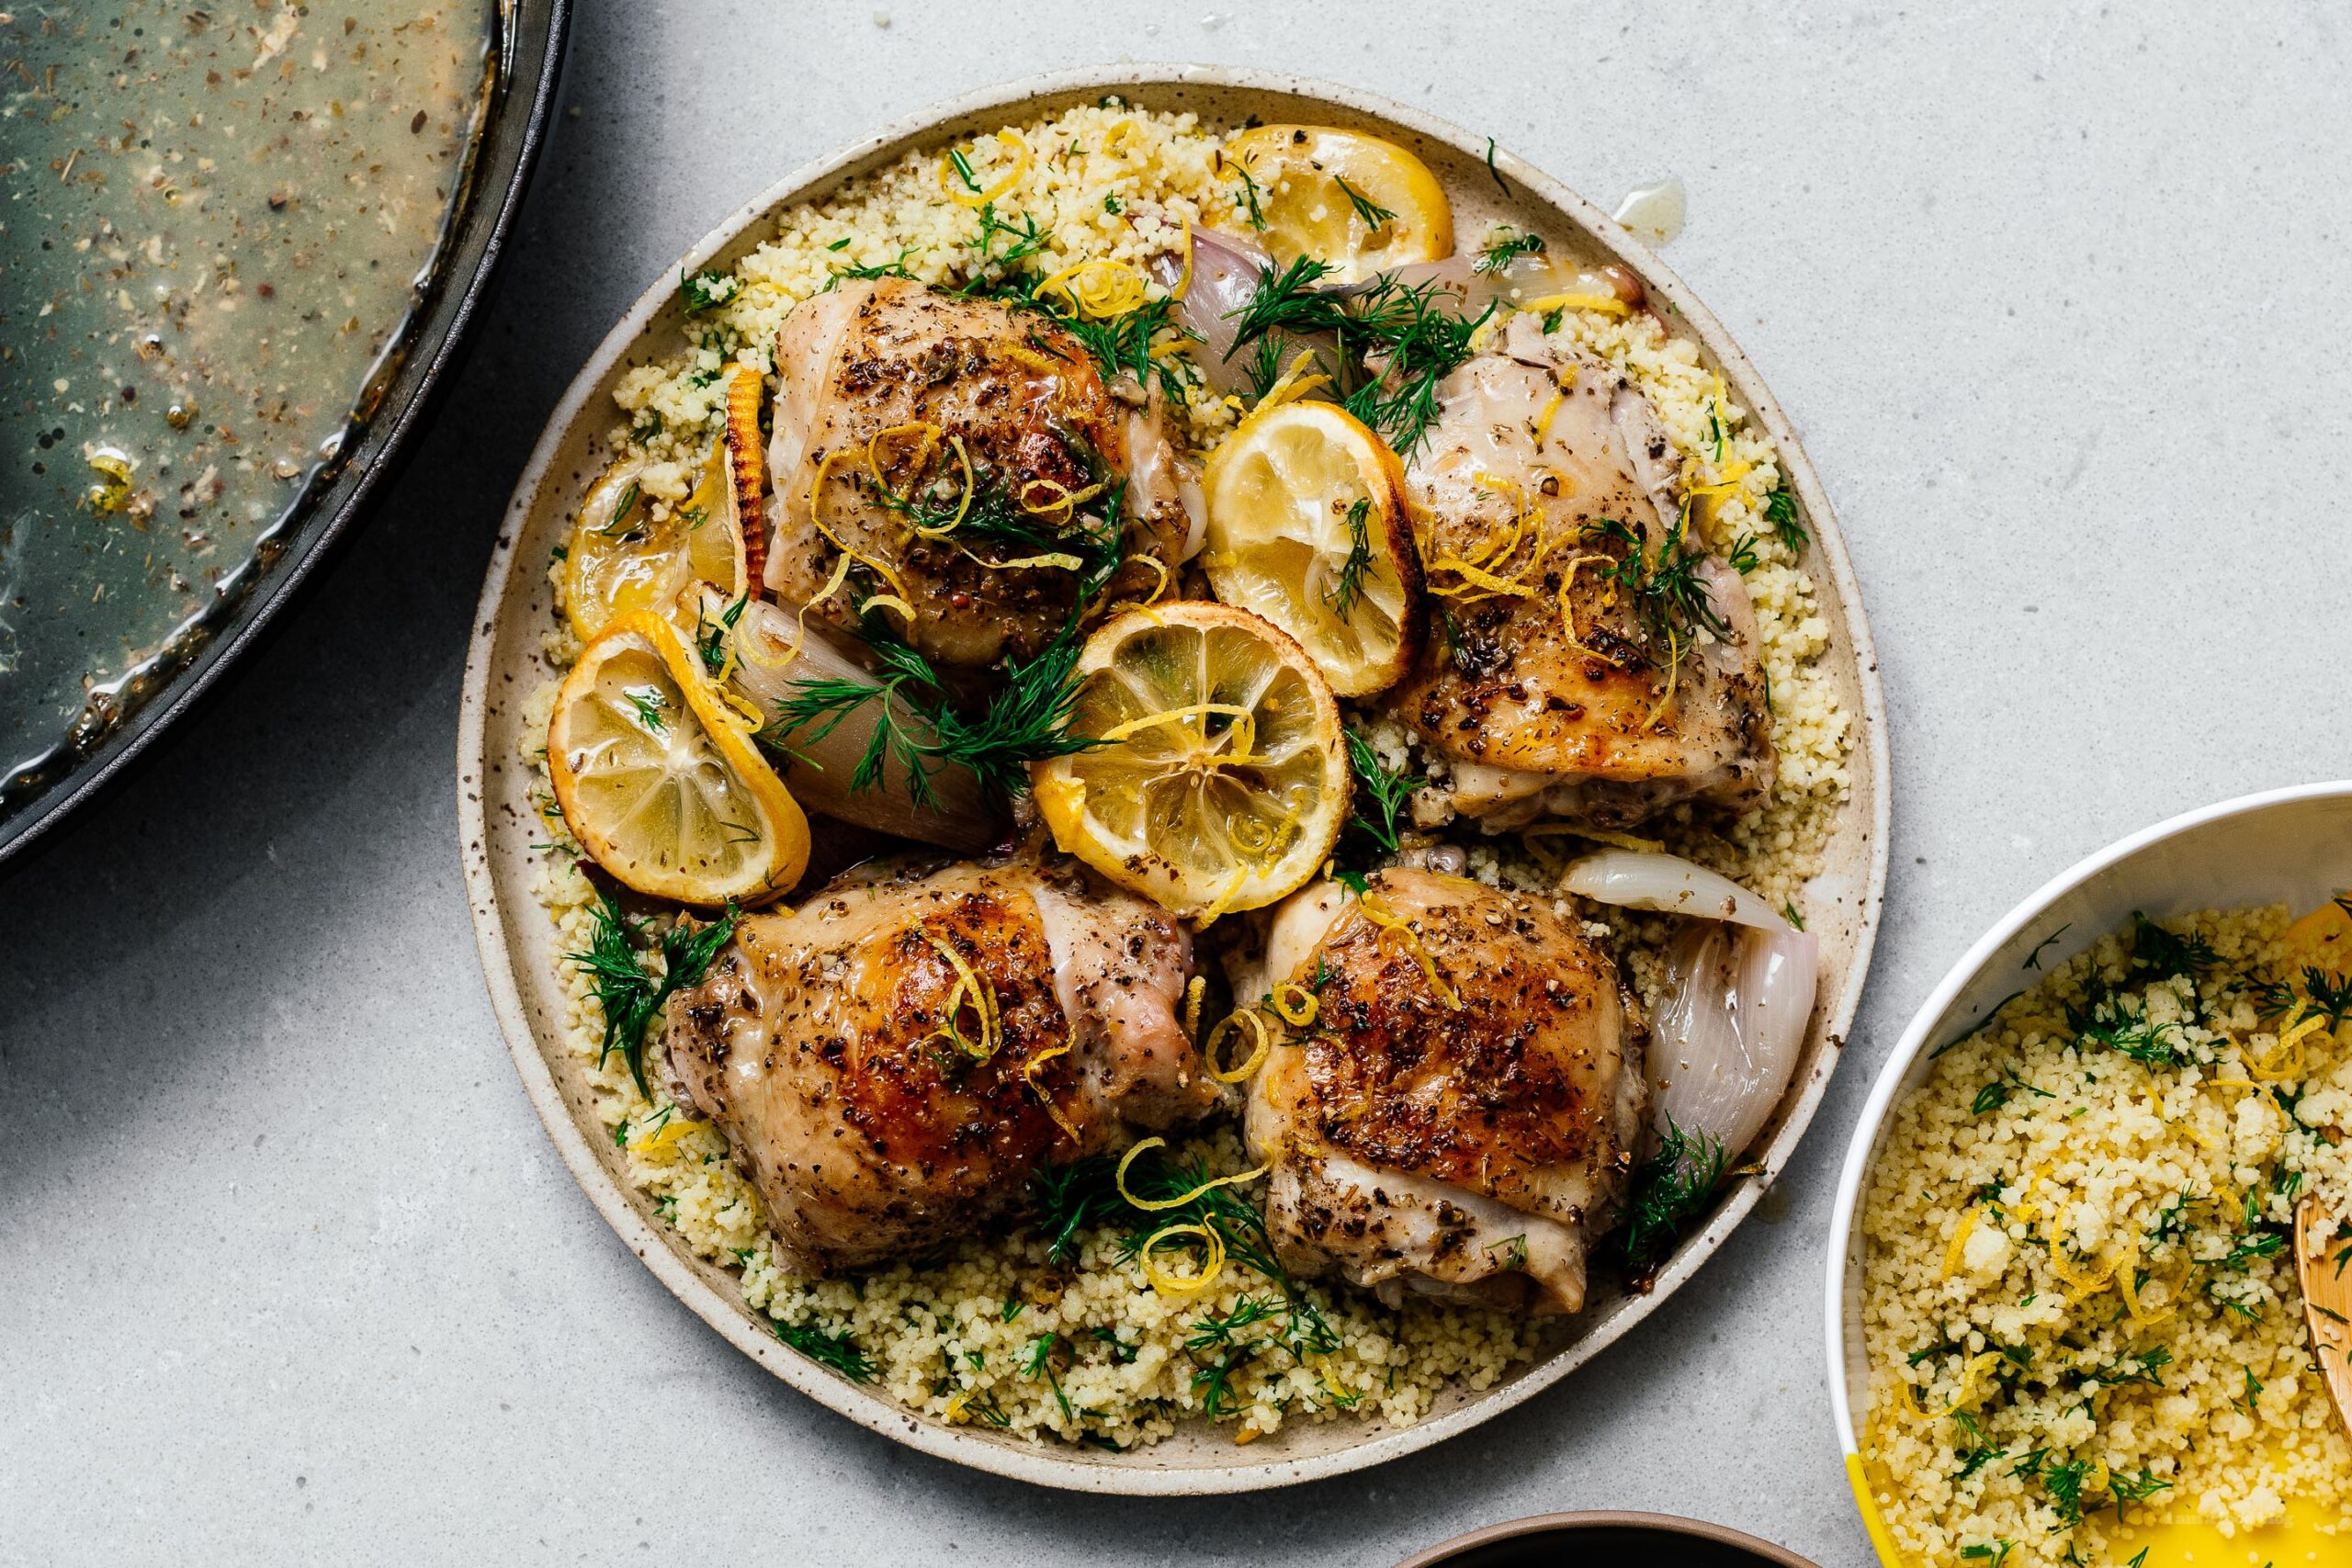 Lemon Pepper Chicken with Cous Cous | www.iamafoodblog.com